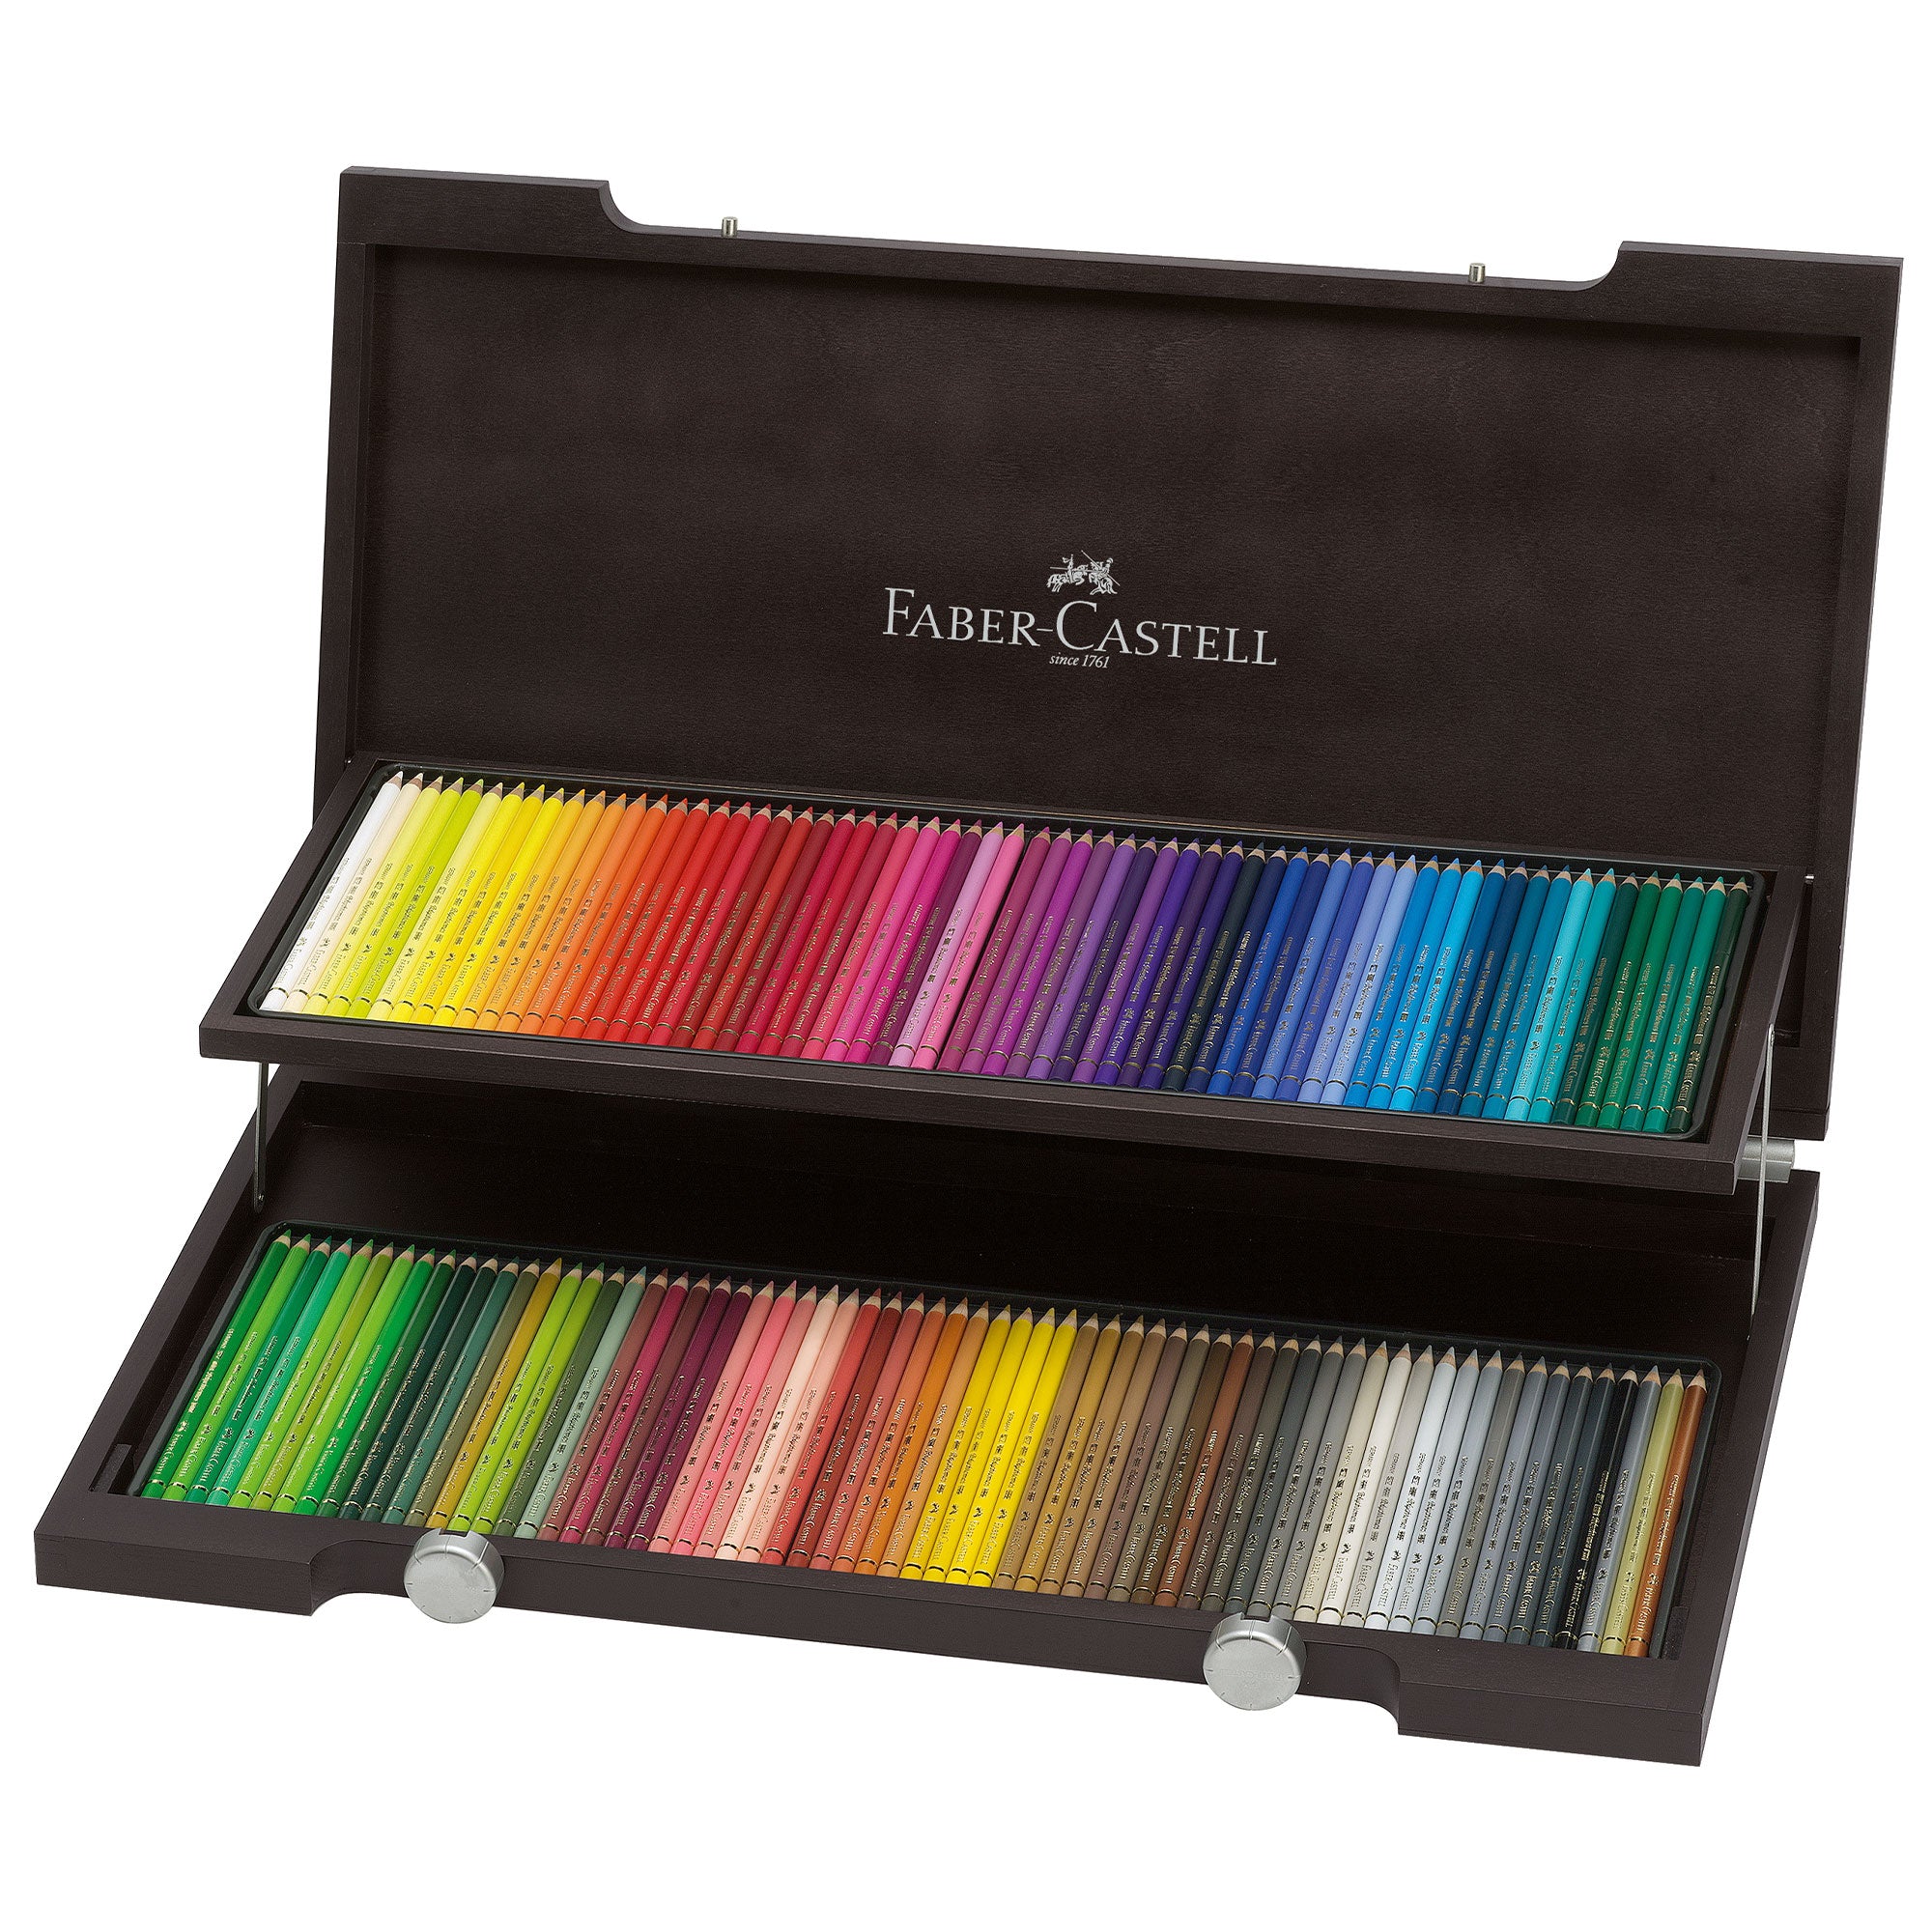 Faber-Castell Polychromos Wooden Case of 120